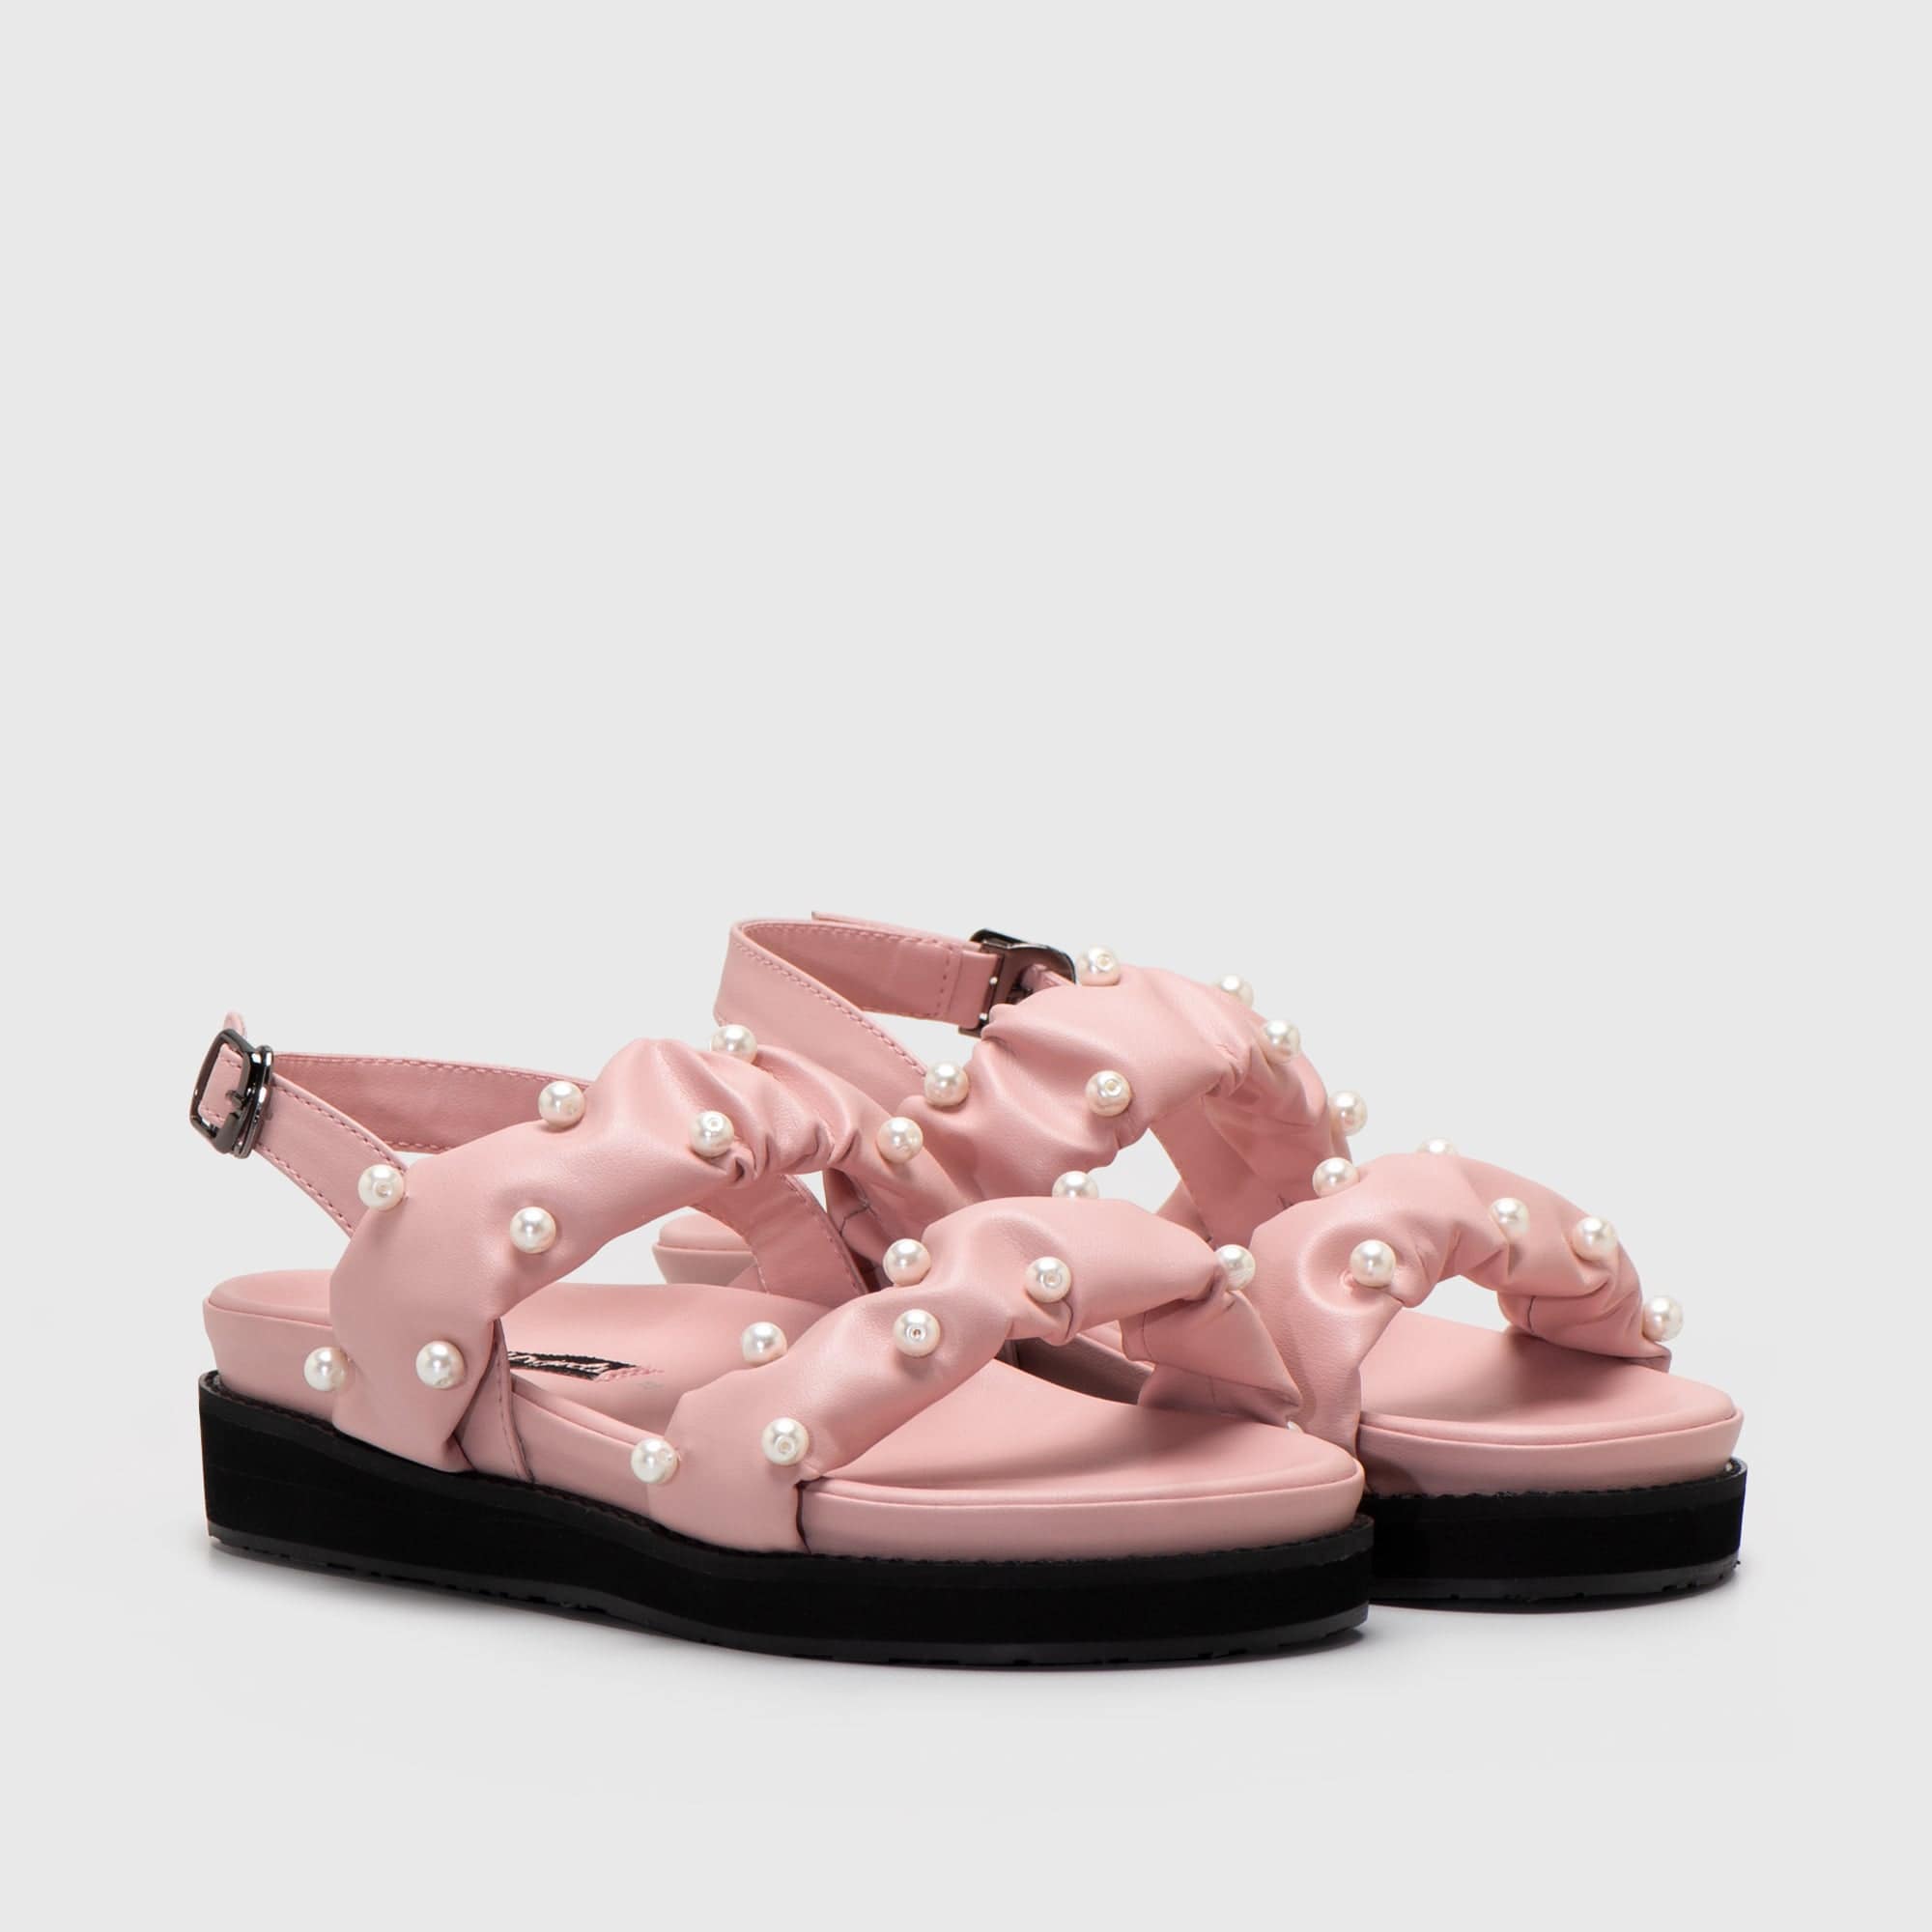 Adorable Projects Official 42 Parinda Sandals Pink